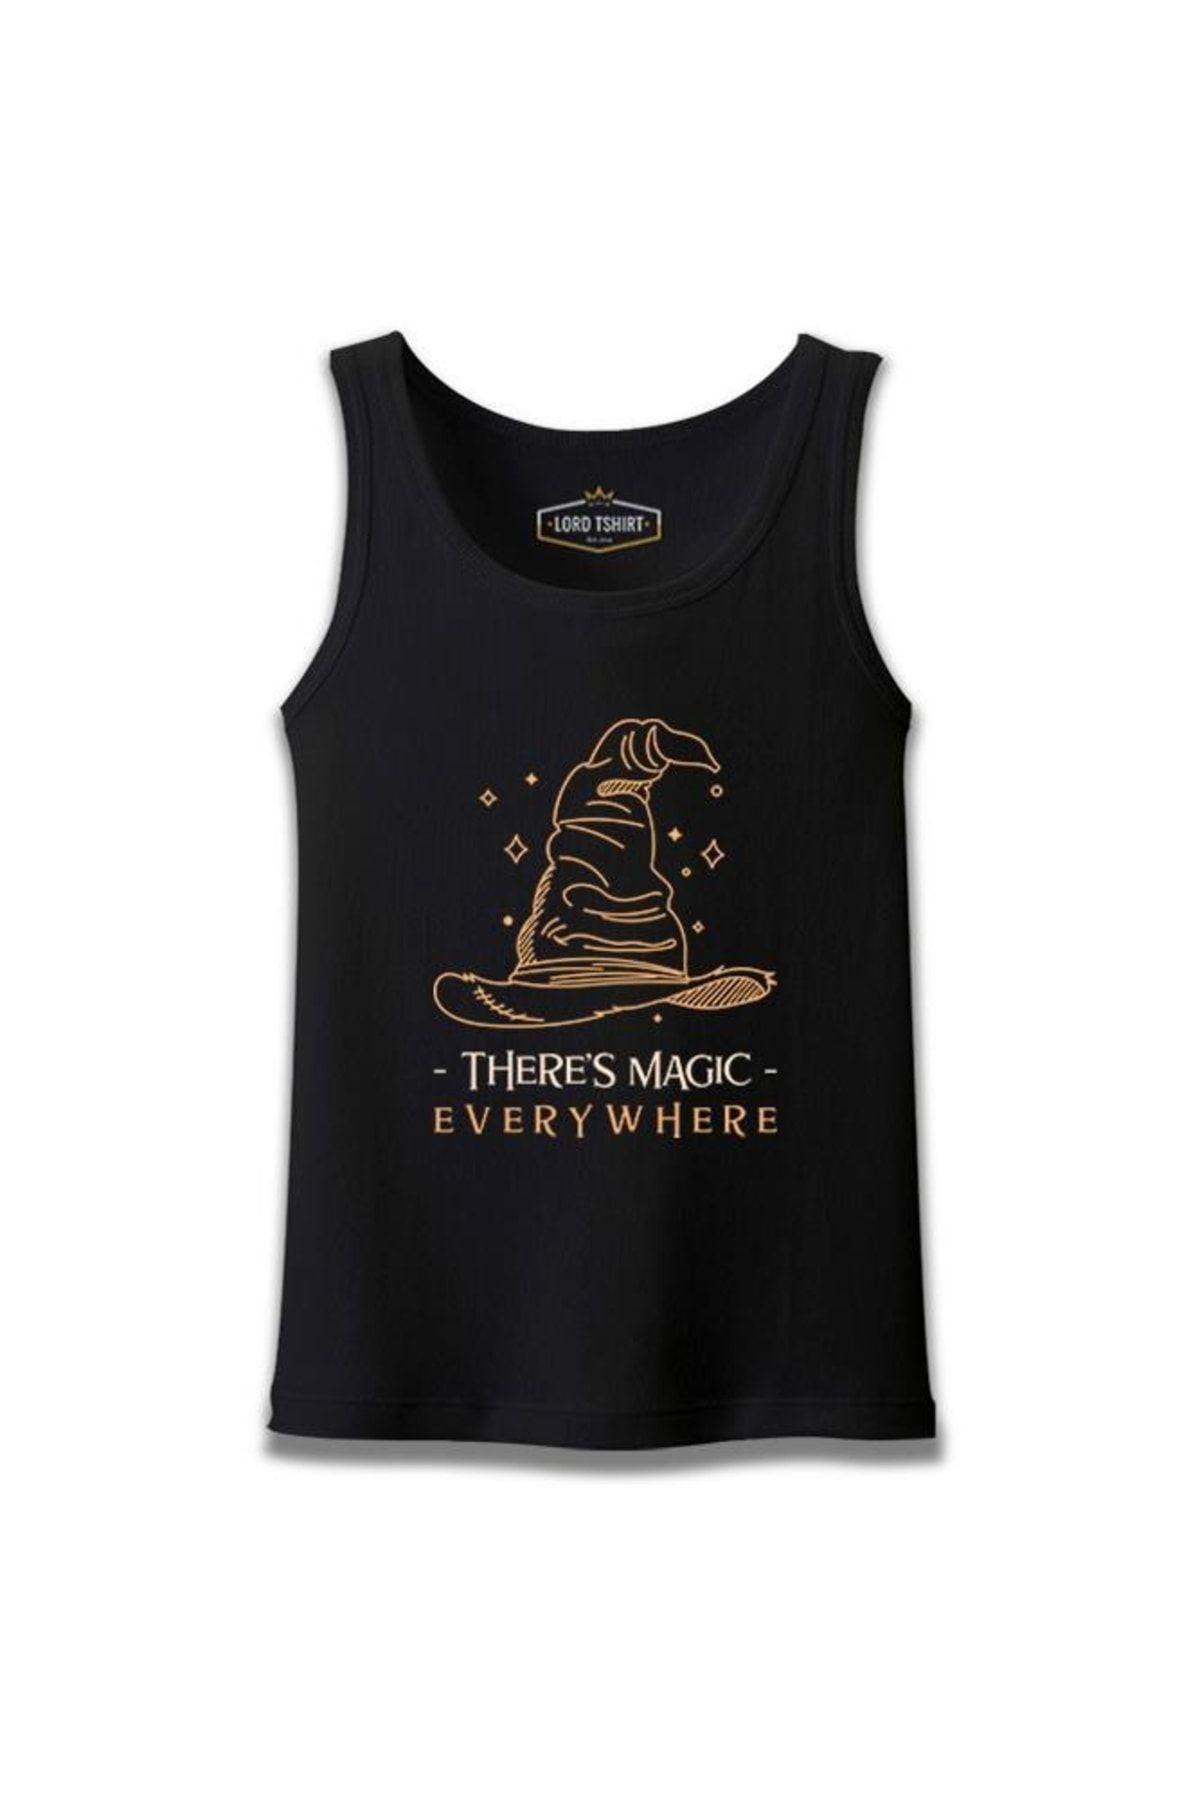 Lord T-Shirt There Is Magic Everywhere Witch Hat Siyah Erkek Atlet